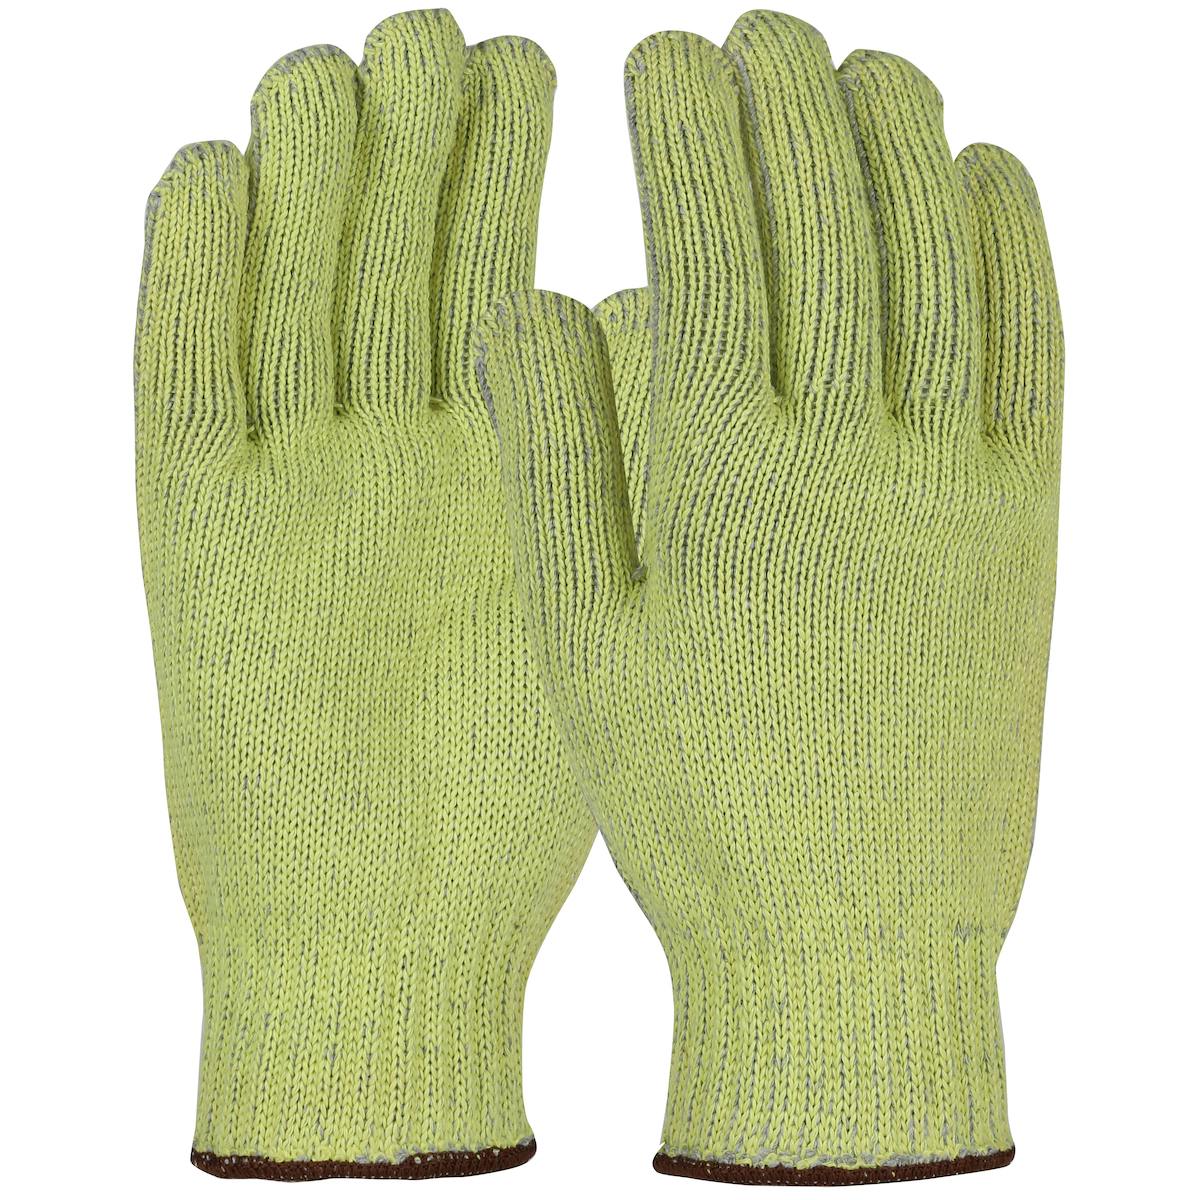 Kut Gard® Seamless Knit ATA® / Aramid Blended Glove with Cotton/Polyester Plating - Heavy Weight (MATA500)